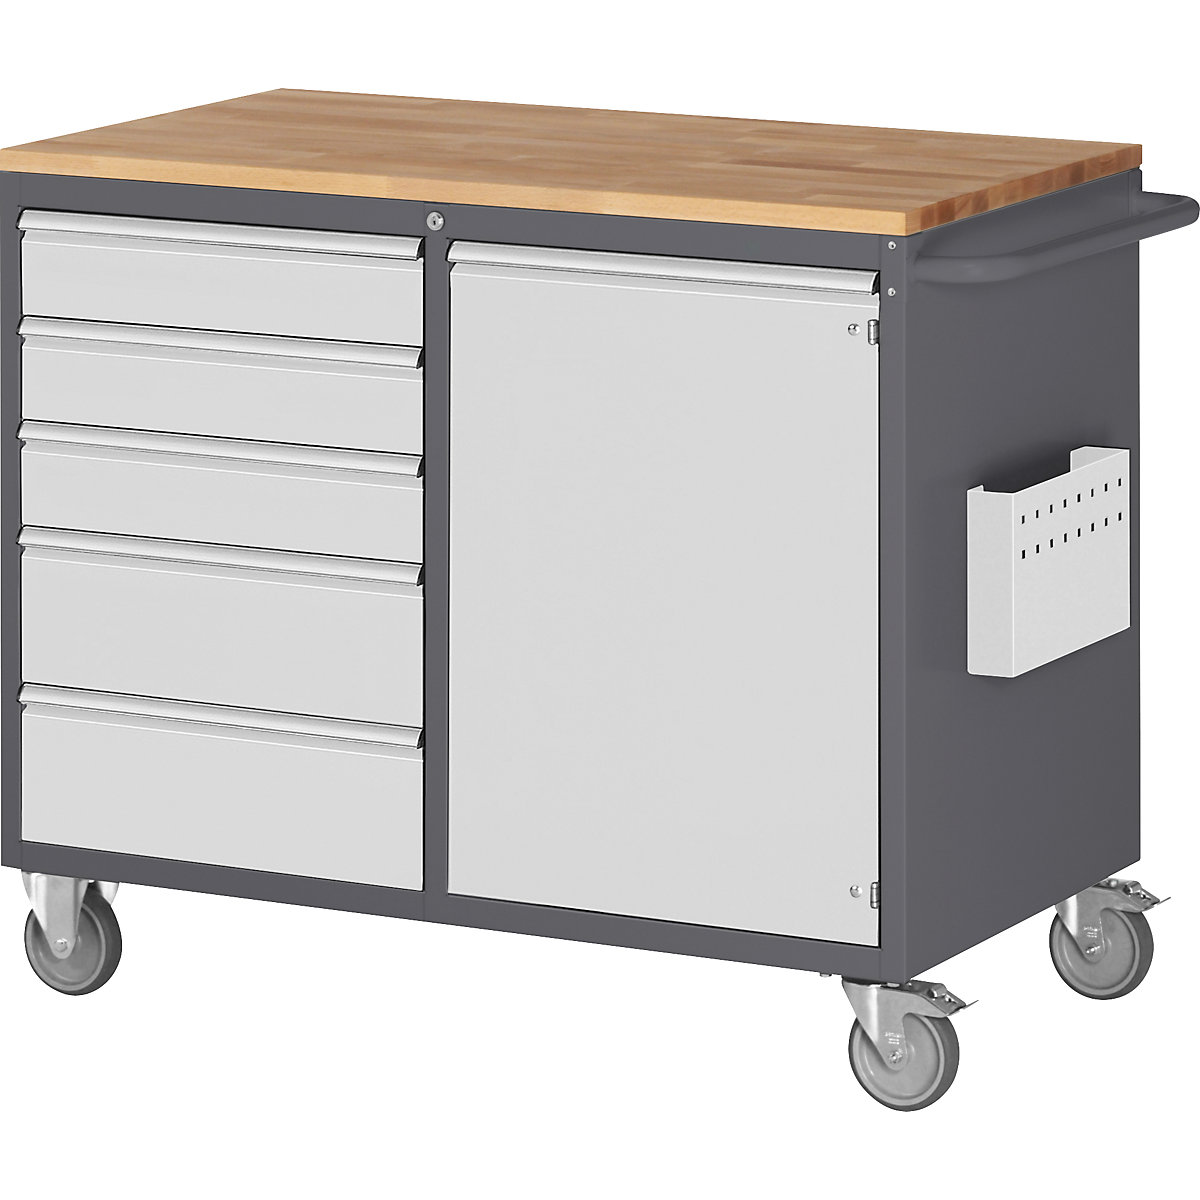 Compact workbenches, mobile – RAU, 5 drawers, 1 door, wood work surface, charcoal / light grey-2